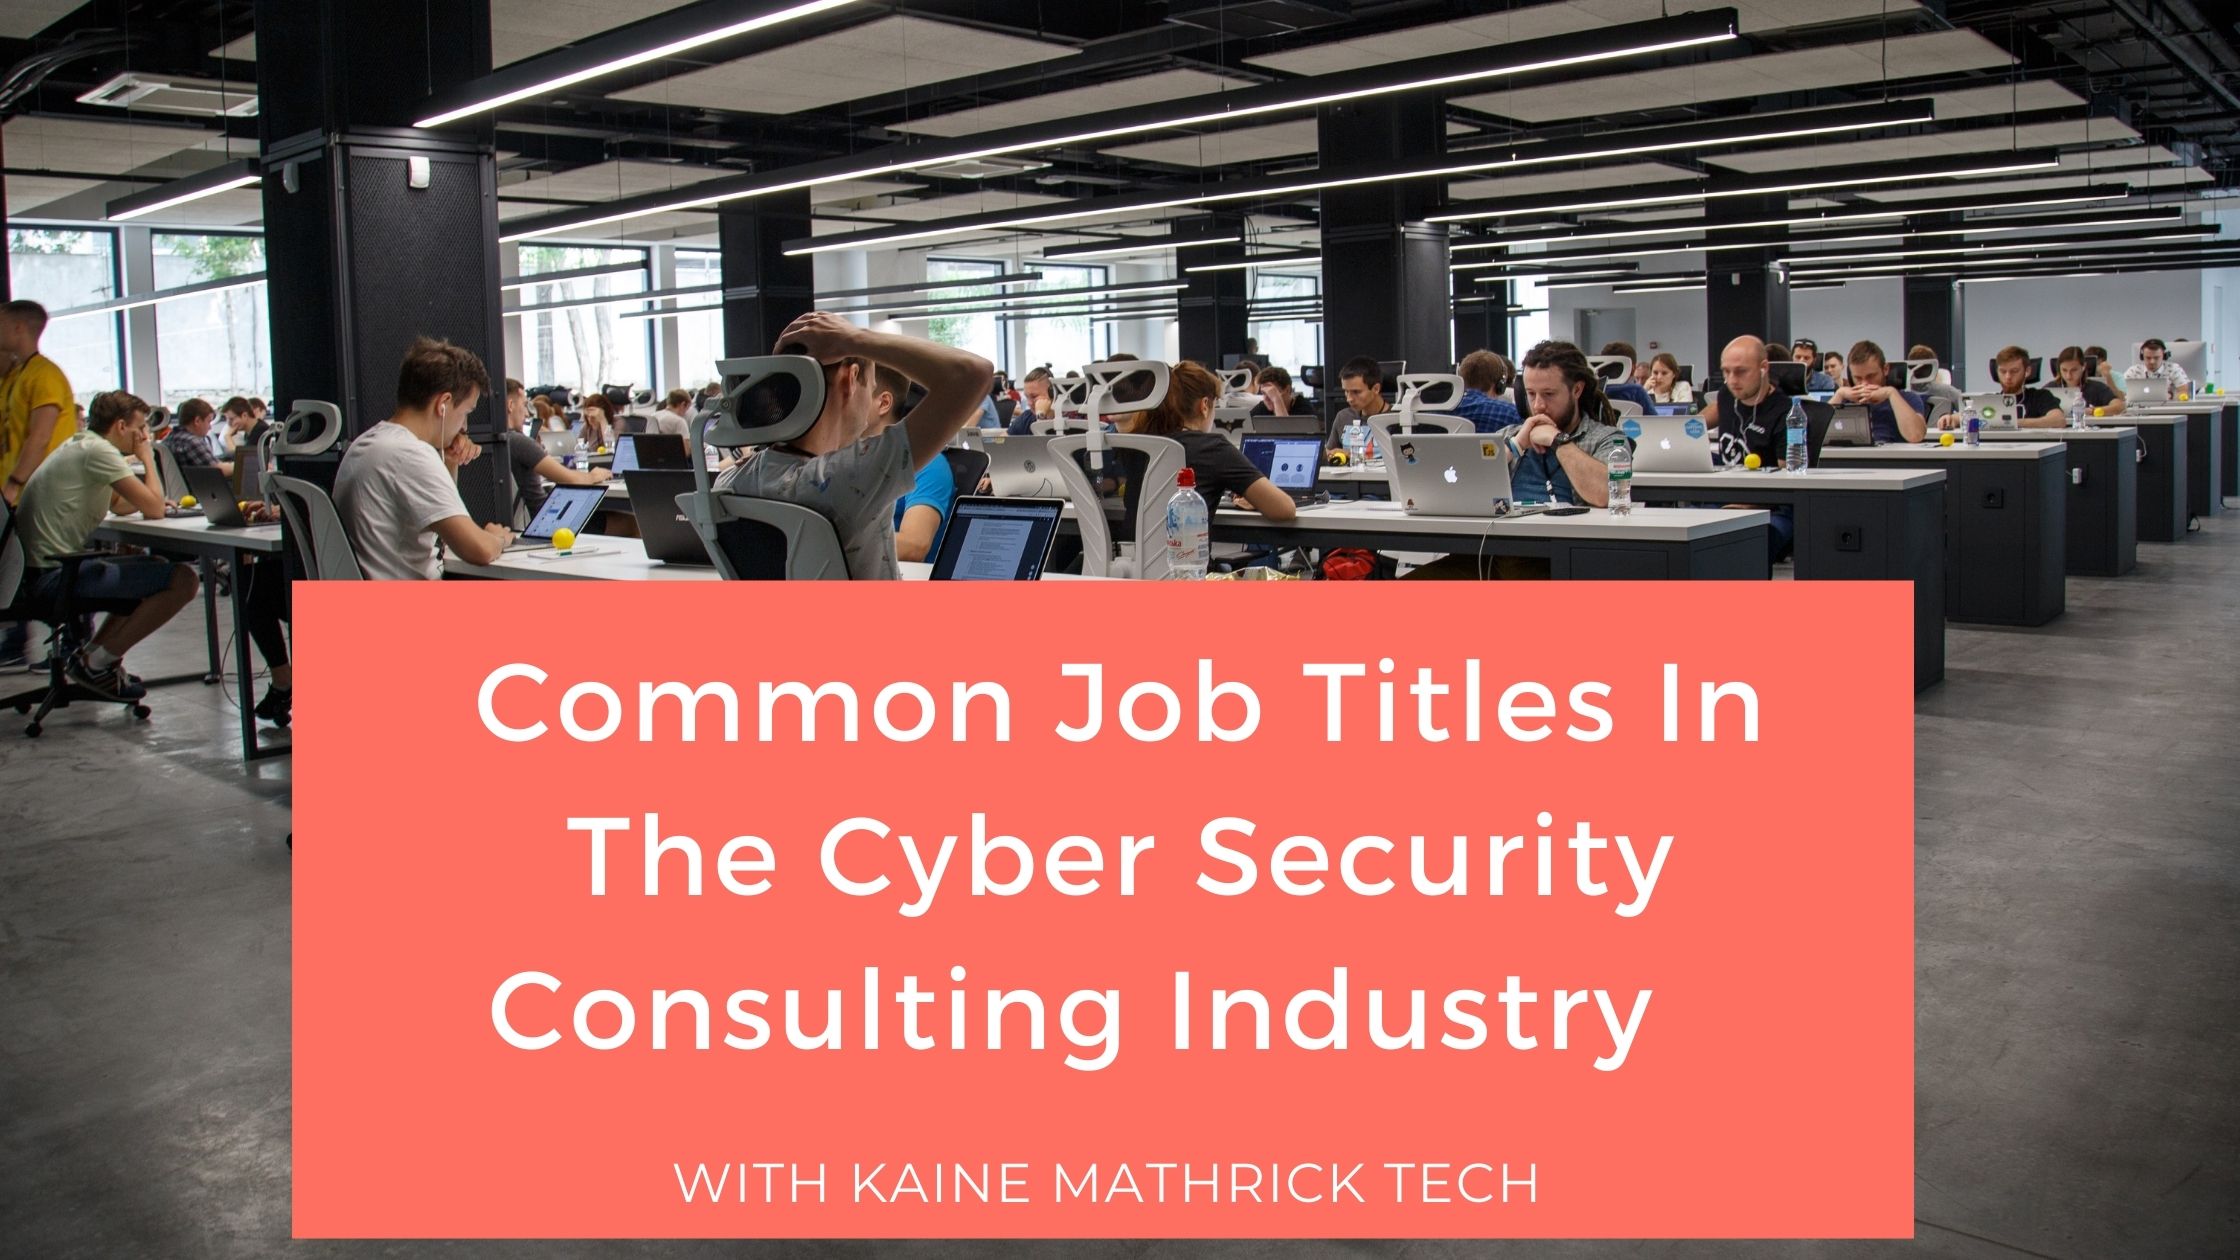 Common Job Titles In The Cyber Security Consulting Industry